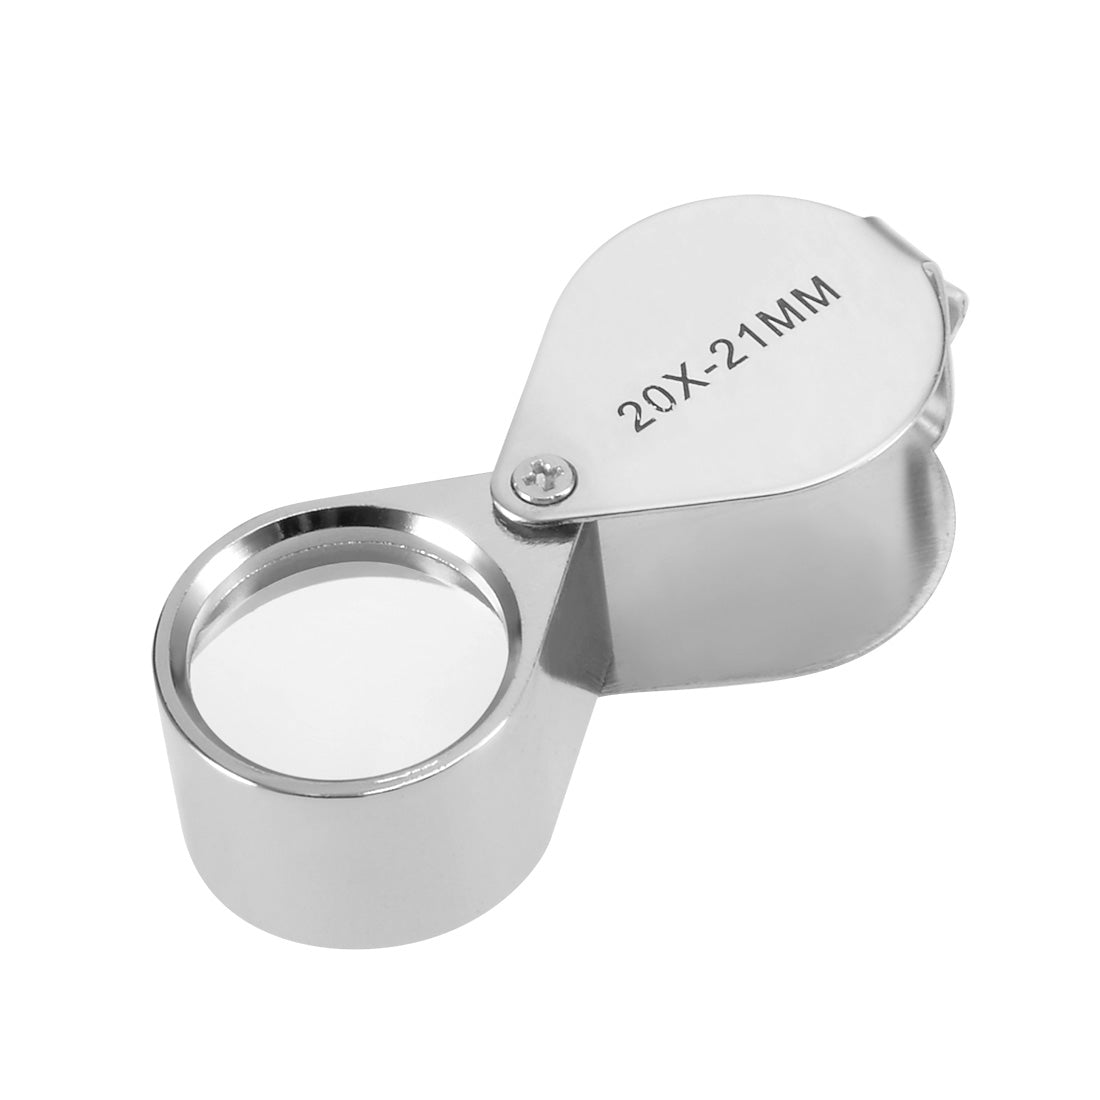 uxcell Uxcell Mini Microscope Jewelers Eye Loupe Magnifier Magnifying Glass Powerful Doublet, Chrome Plated, Round Body Jewelry Loupe, 21 mm, Silver